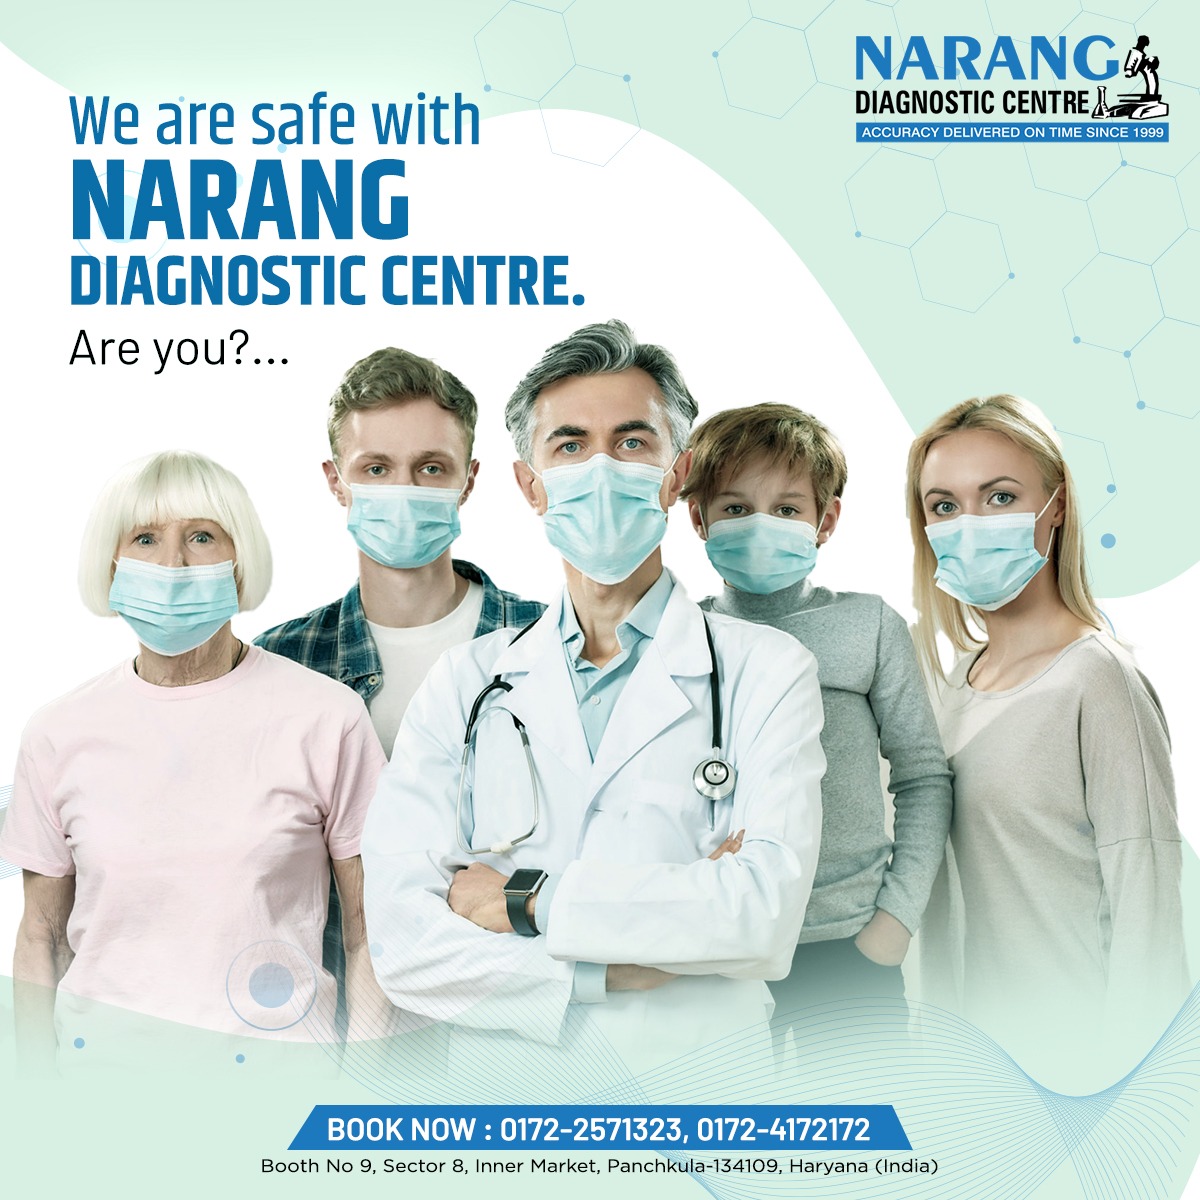 Thousands of homes are safe with Narang Diagnostic Centre. Why stay behind.

Get your Tests done today and Make yourself & Your Family secure with us .

Book your Health Check up now. 0172-2571323 or 0172-4007070 

#Healthpackage #Diagnosticcentre #Trusteddiagnosticcentre